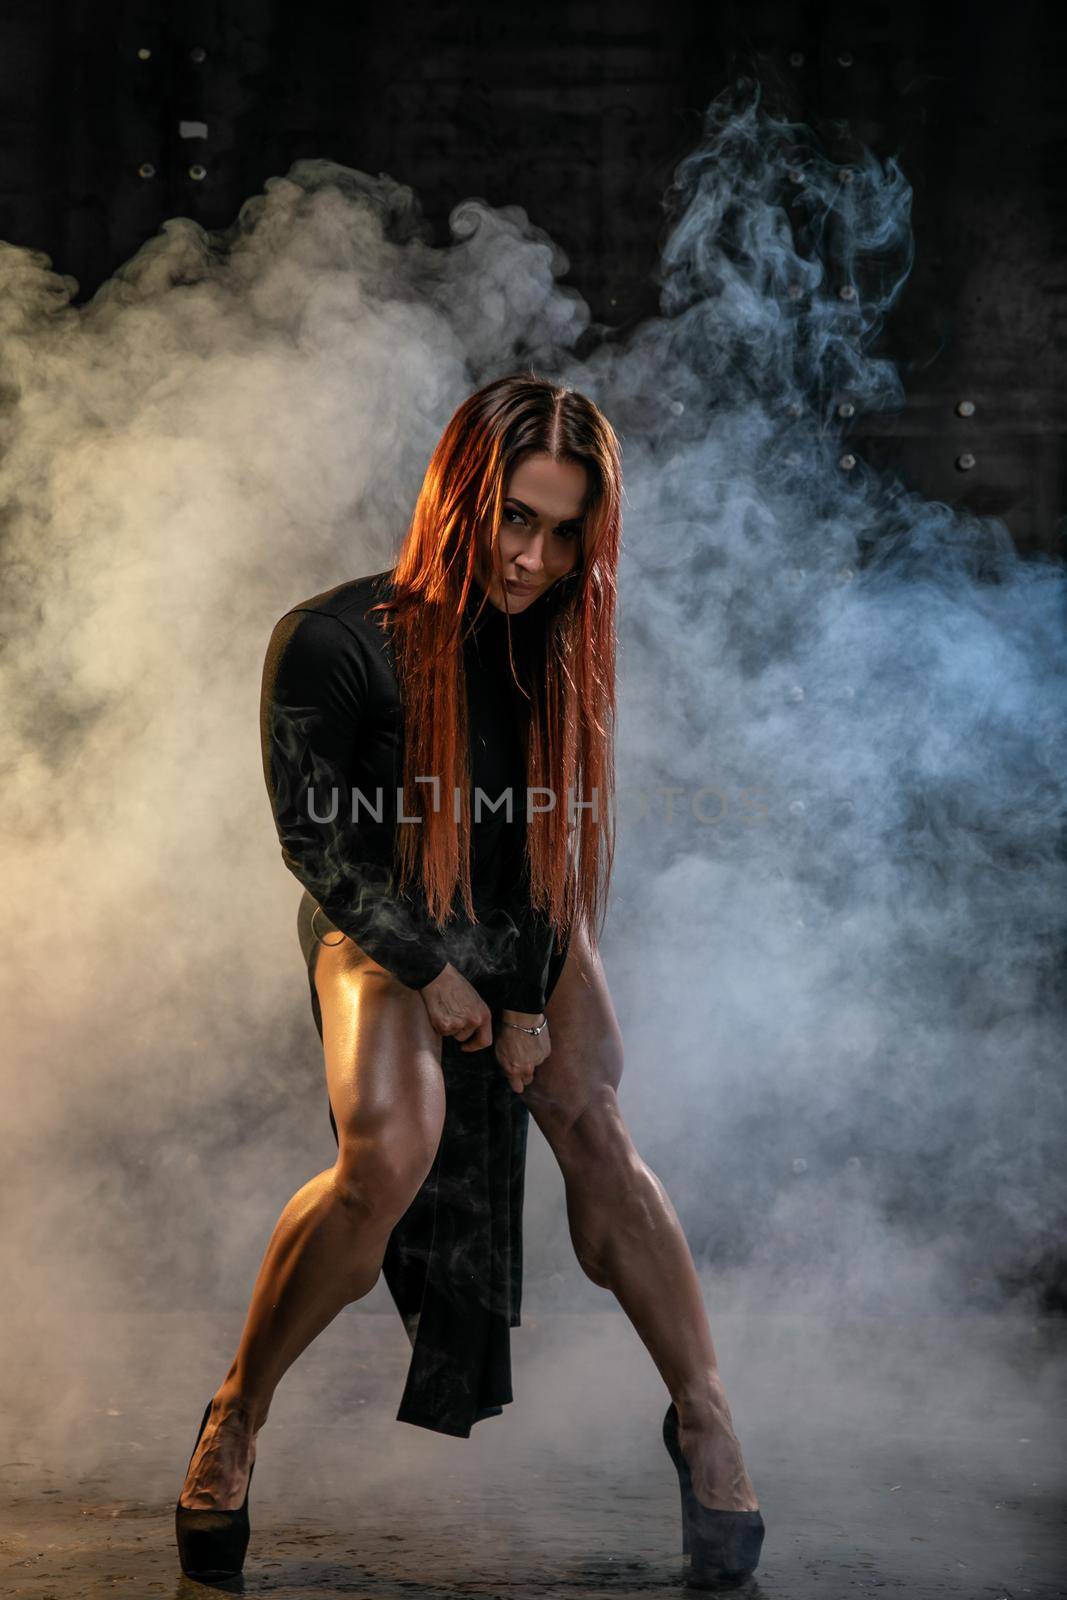 Attractive red-haired girl in black dress demonstrates athletic legs by but_photo